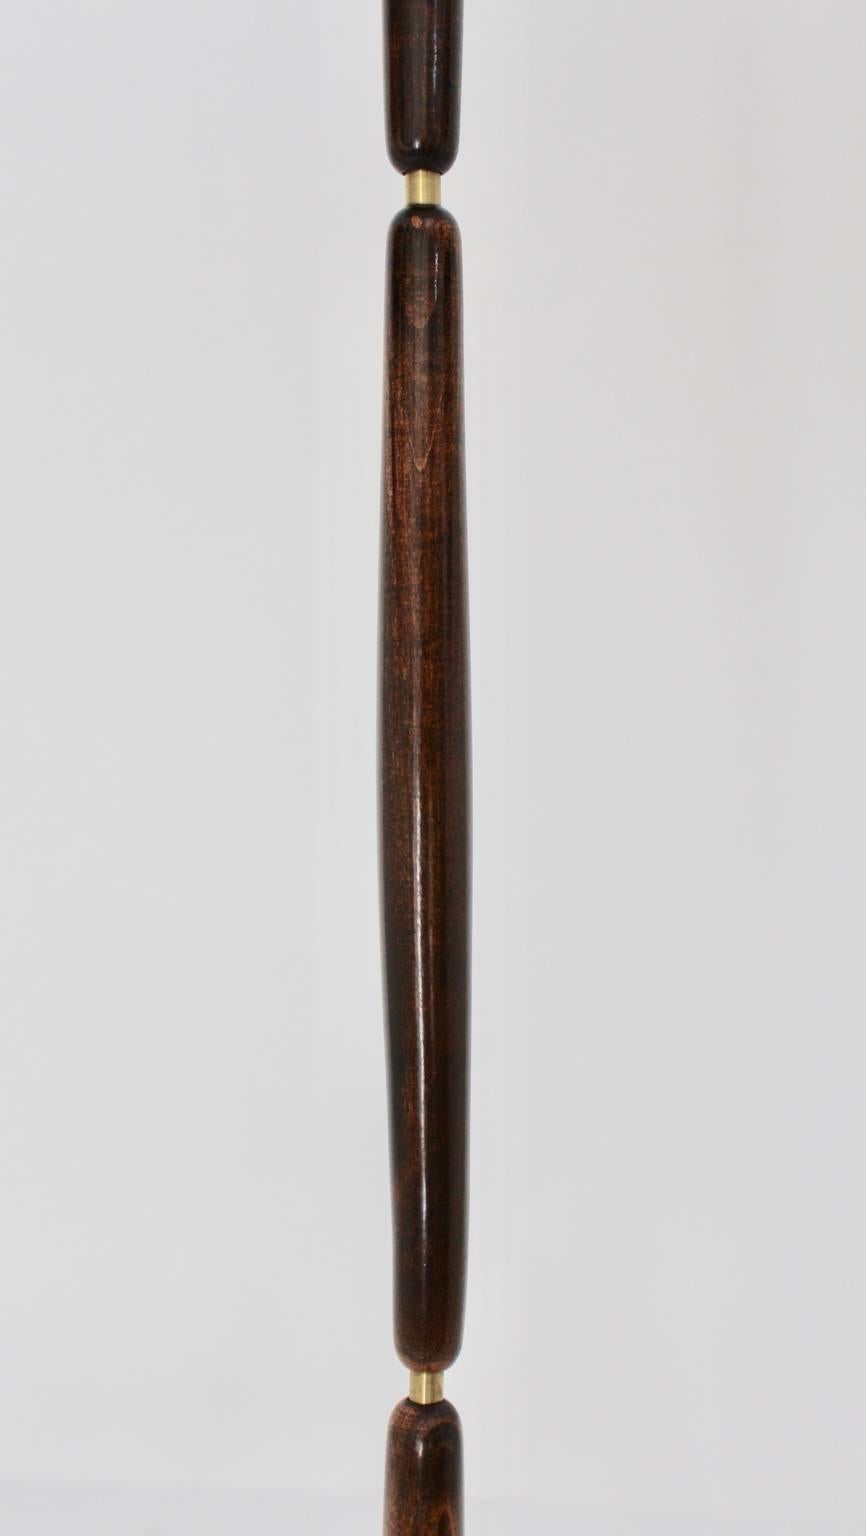 Brass Beech Vintage Floor Lamp Attributed to Giuseppe Ostuni Italy ca 1949 For Sale 10